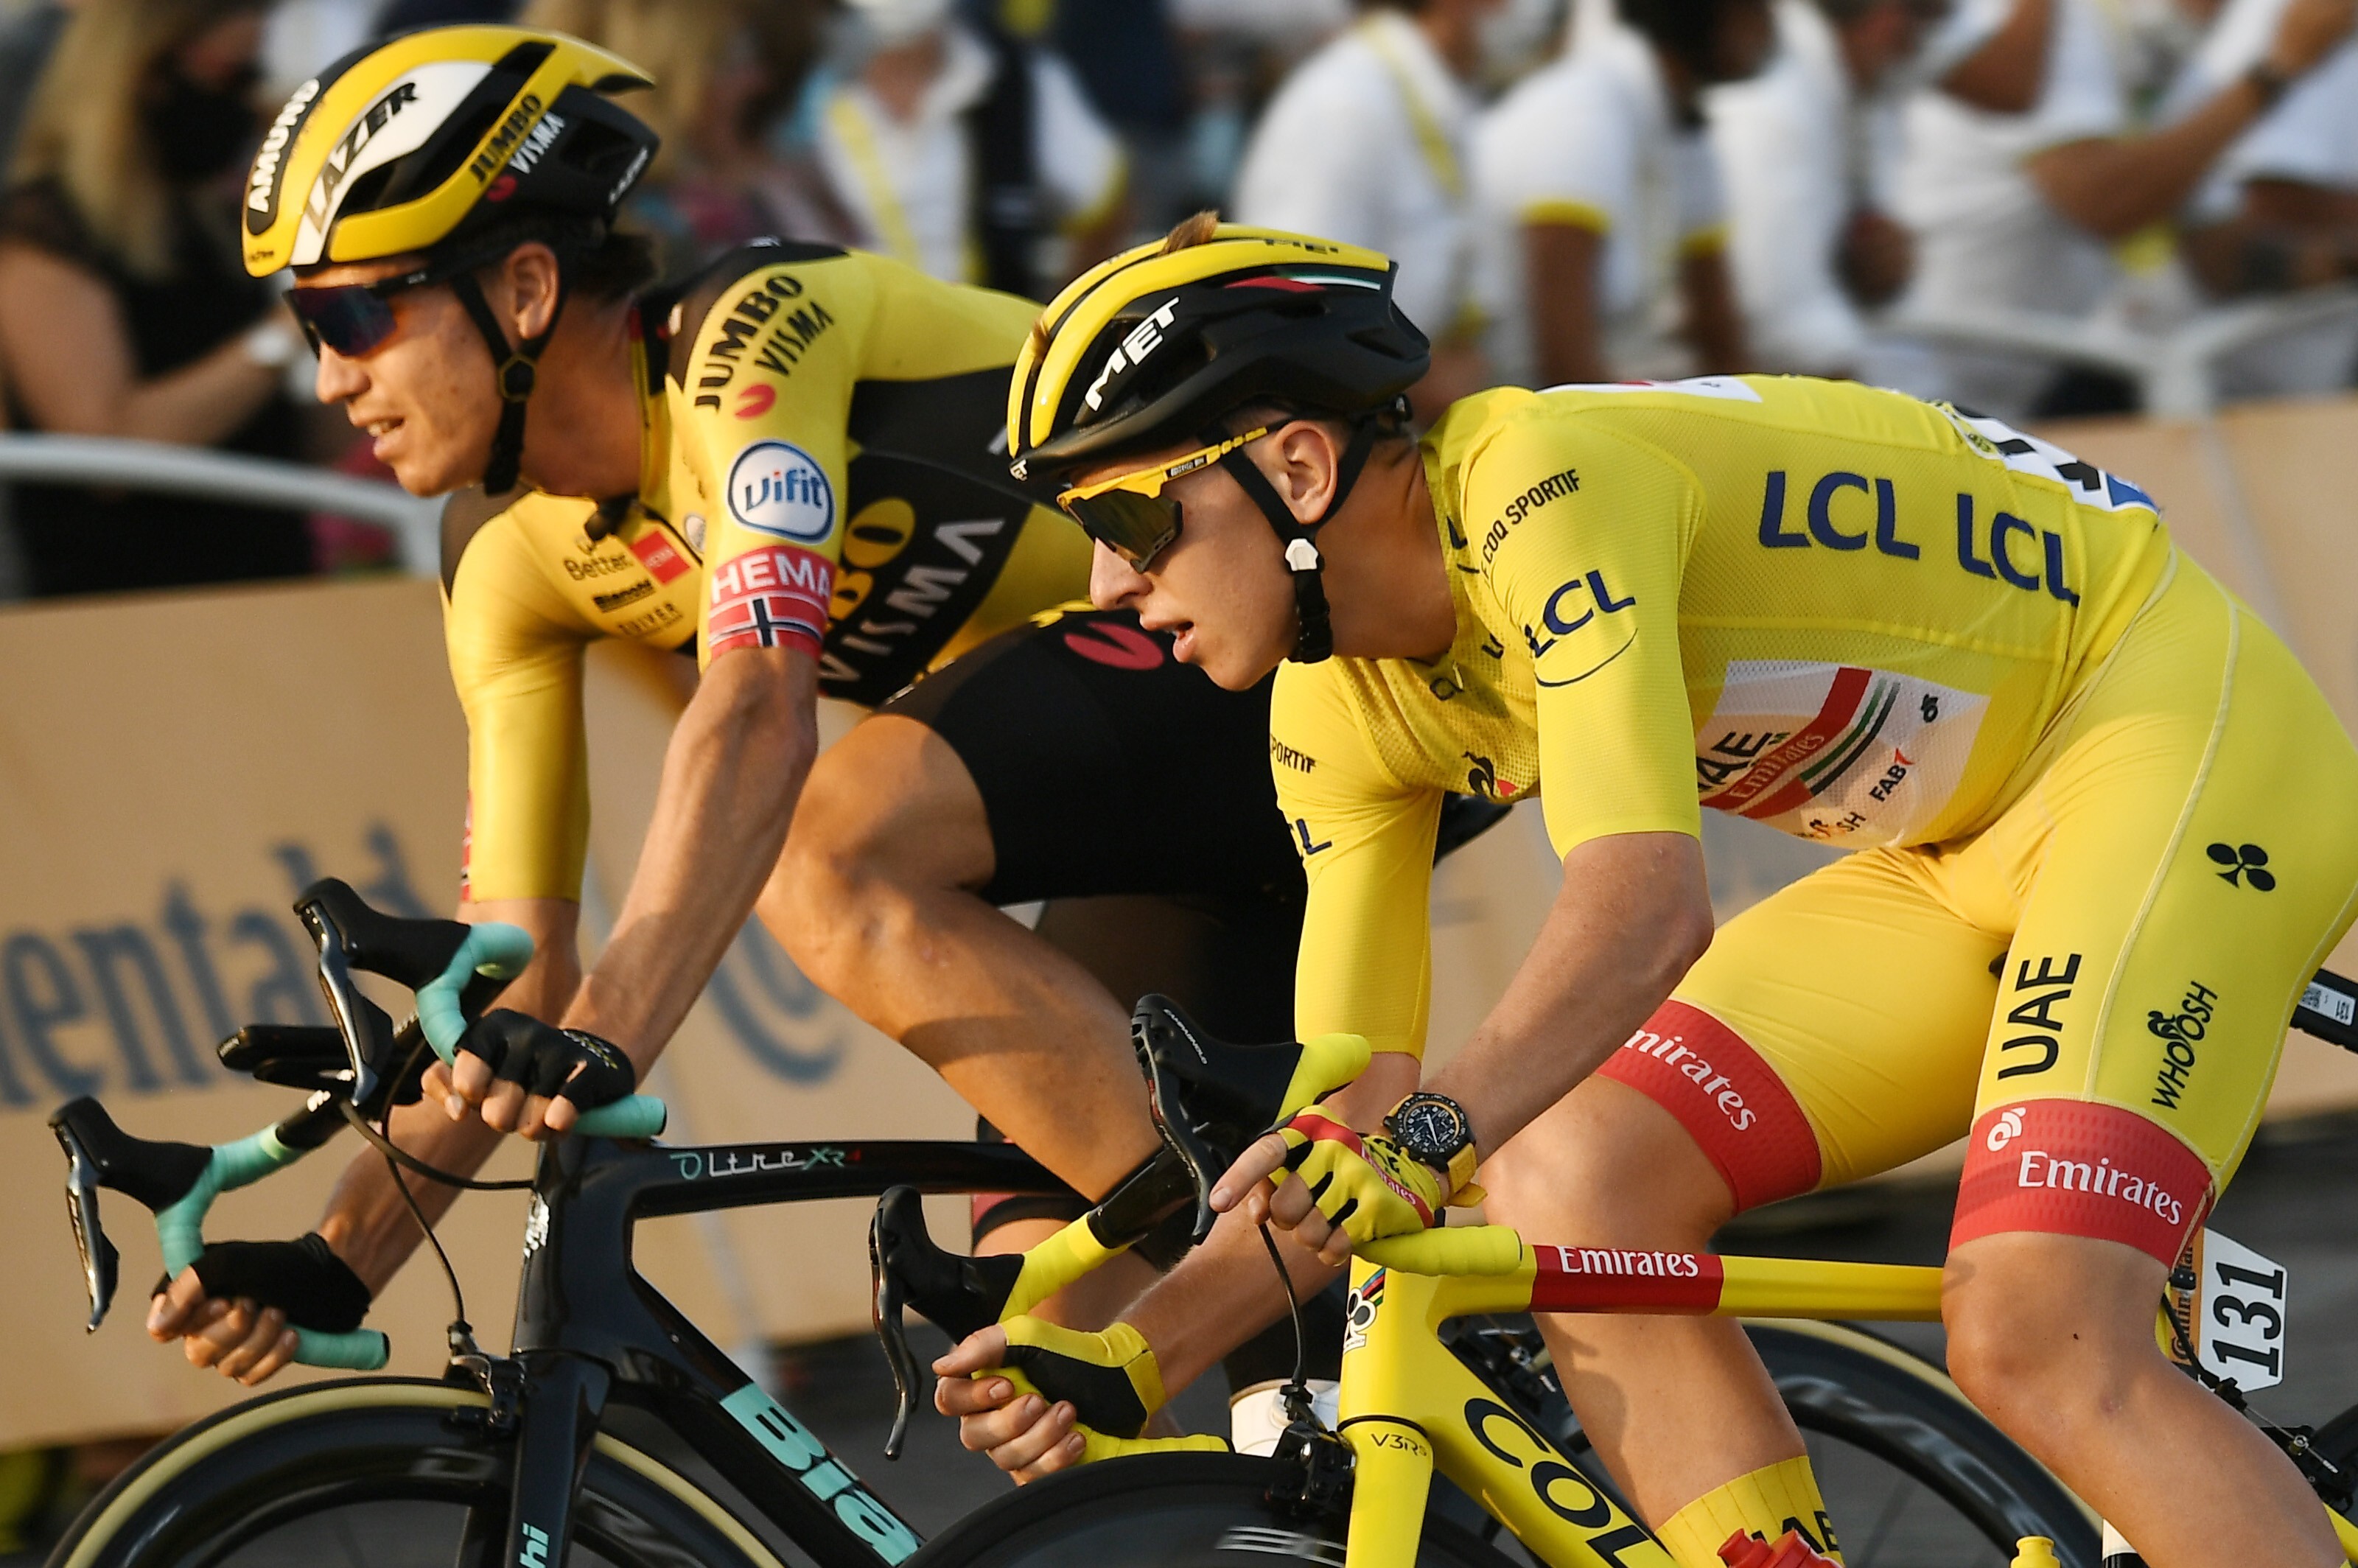 Team UAE Emirates rider Tadej Pogacar (of Slovenia), wearing the overall leader’s yellow jersey, rides next to Team Jumbo rider Wout van Aert (of Belgium) in 2020. The Tour de France is a complicated race with tactics at play and different jerseys up for grabs. Photo: Marco Bertorello/AFP